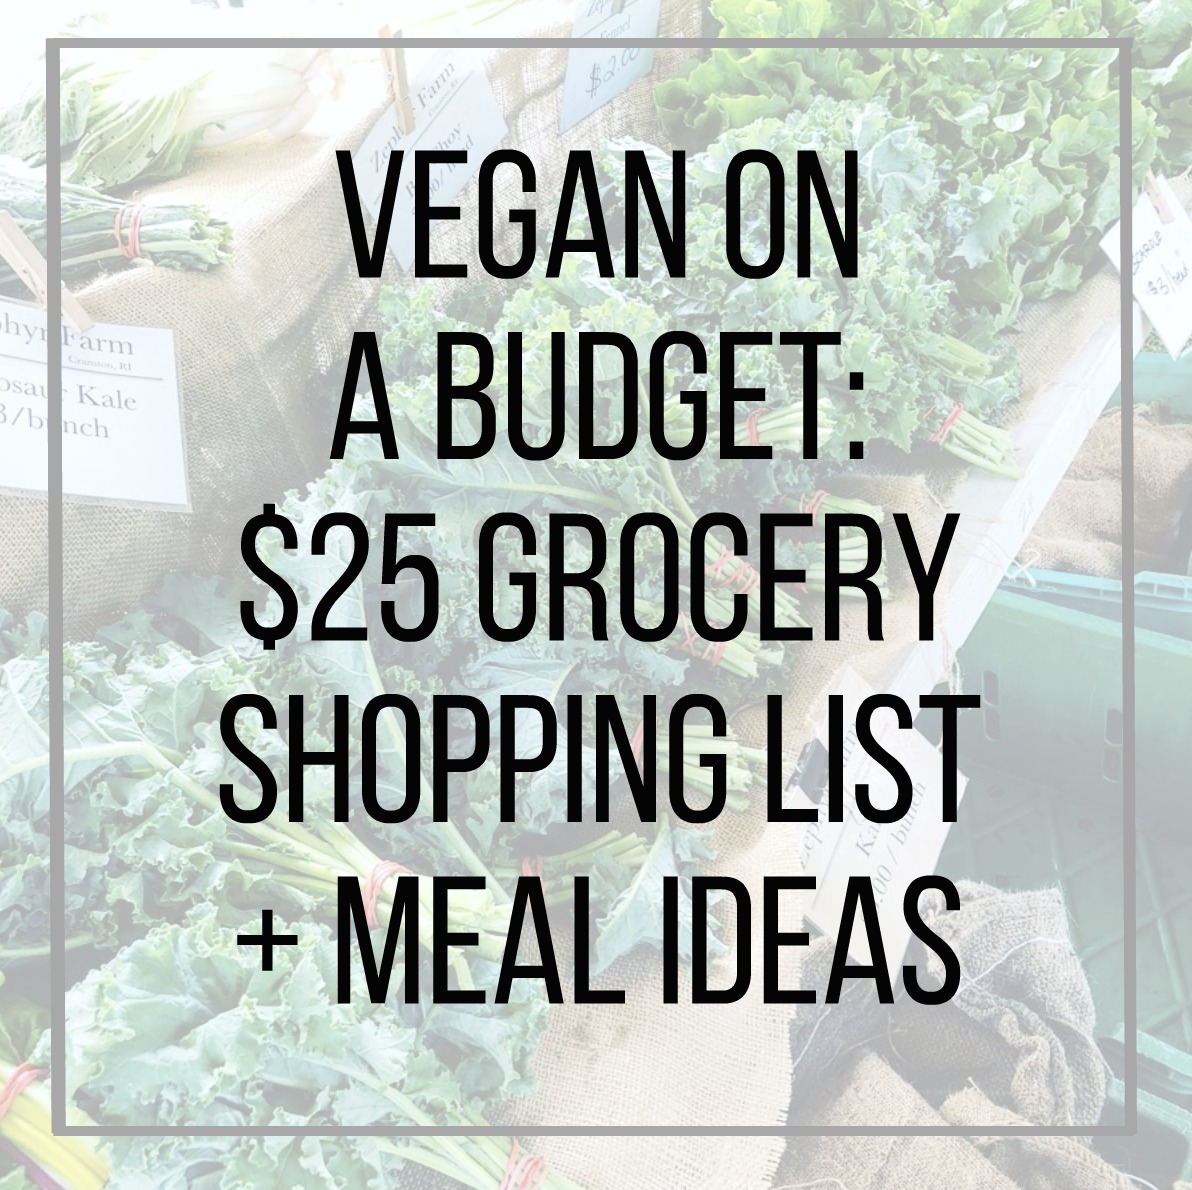 Vegan on a Budget: $25 Grocery Shopping List + Meal Ideas